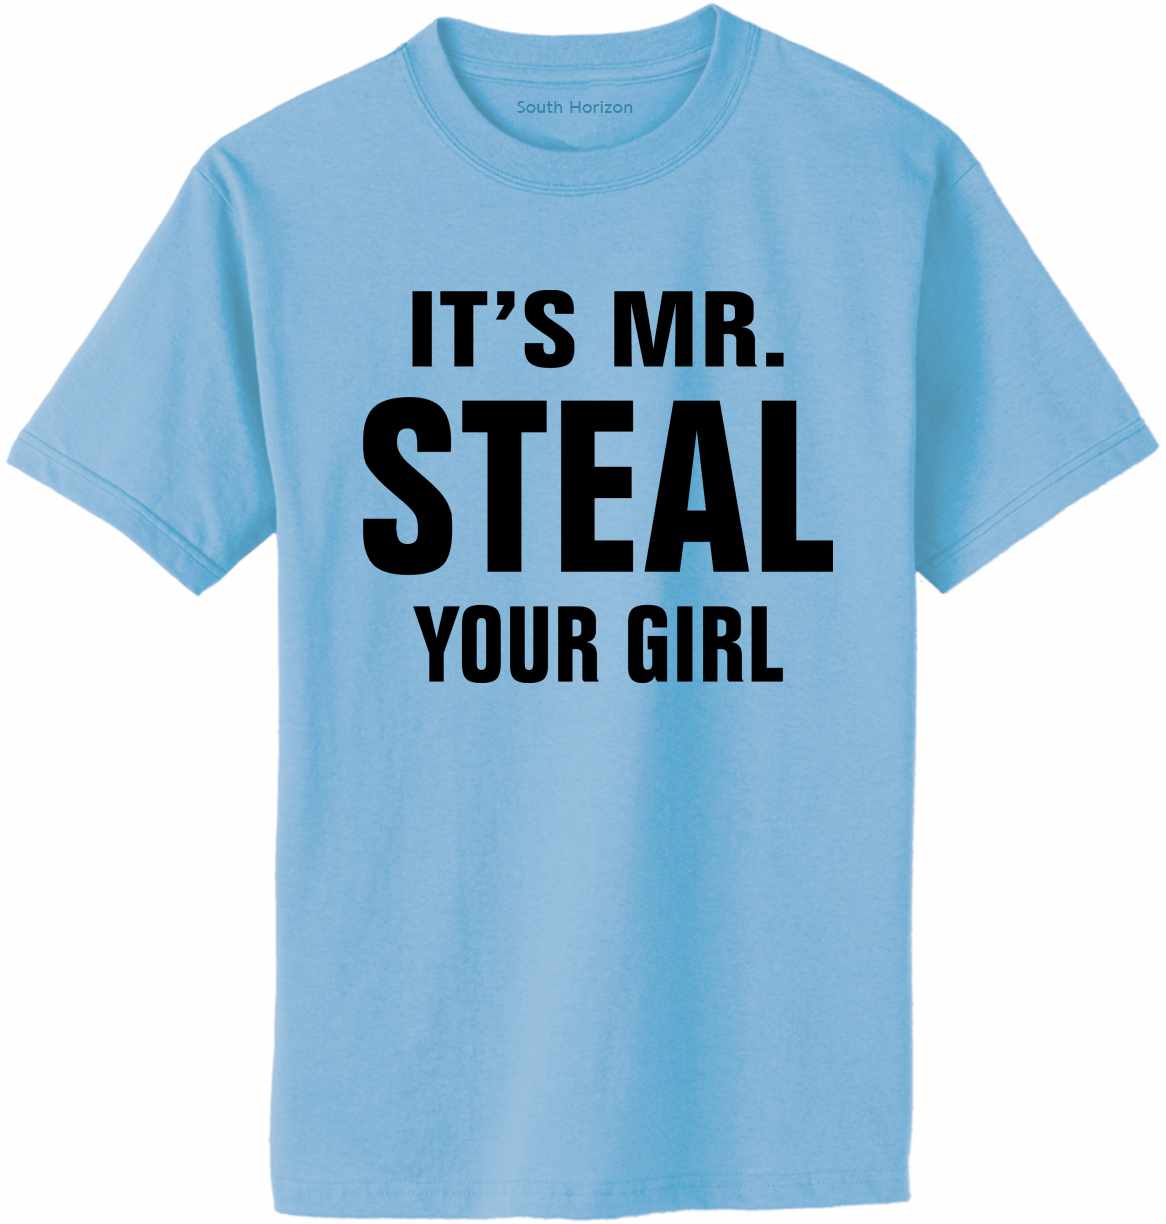 IT'S MR. STEAL YOUR GIRL Adult T-Shirt